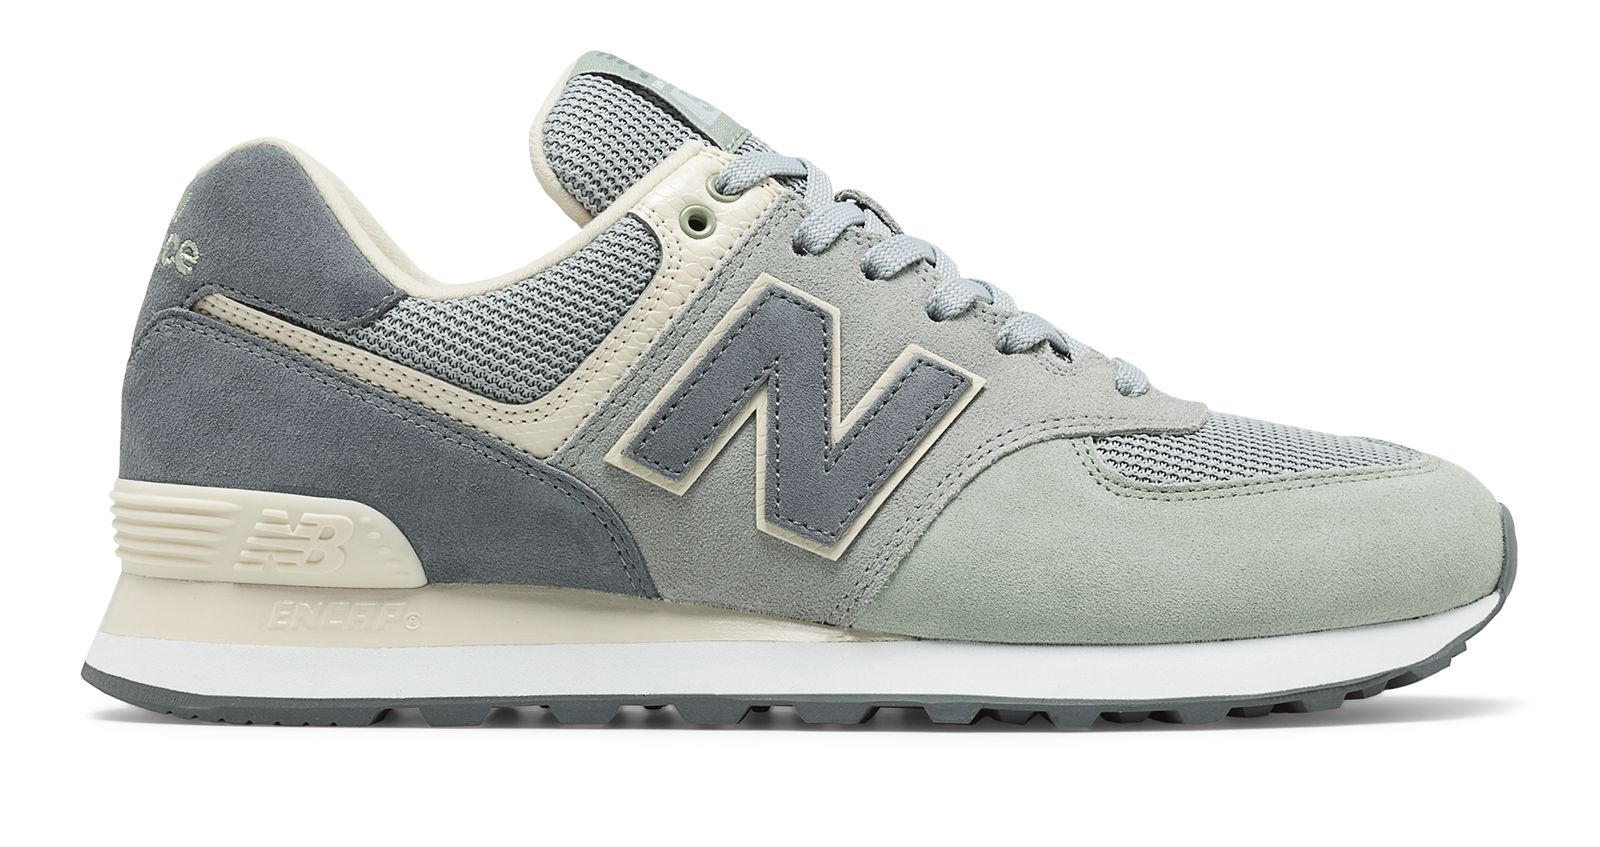 New Balance ML574-V2SL on Sale - Discounts Up to 55% Off on ML574TIV at  Joe's New Balance Outlet